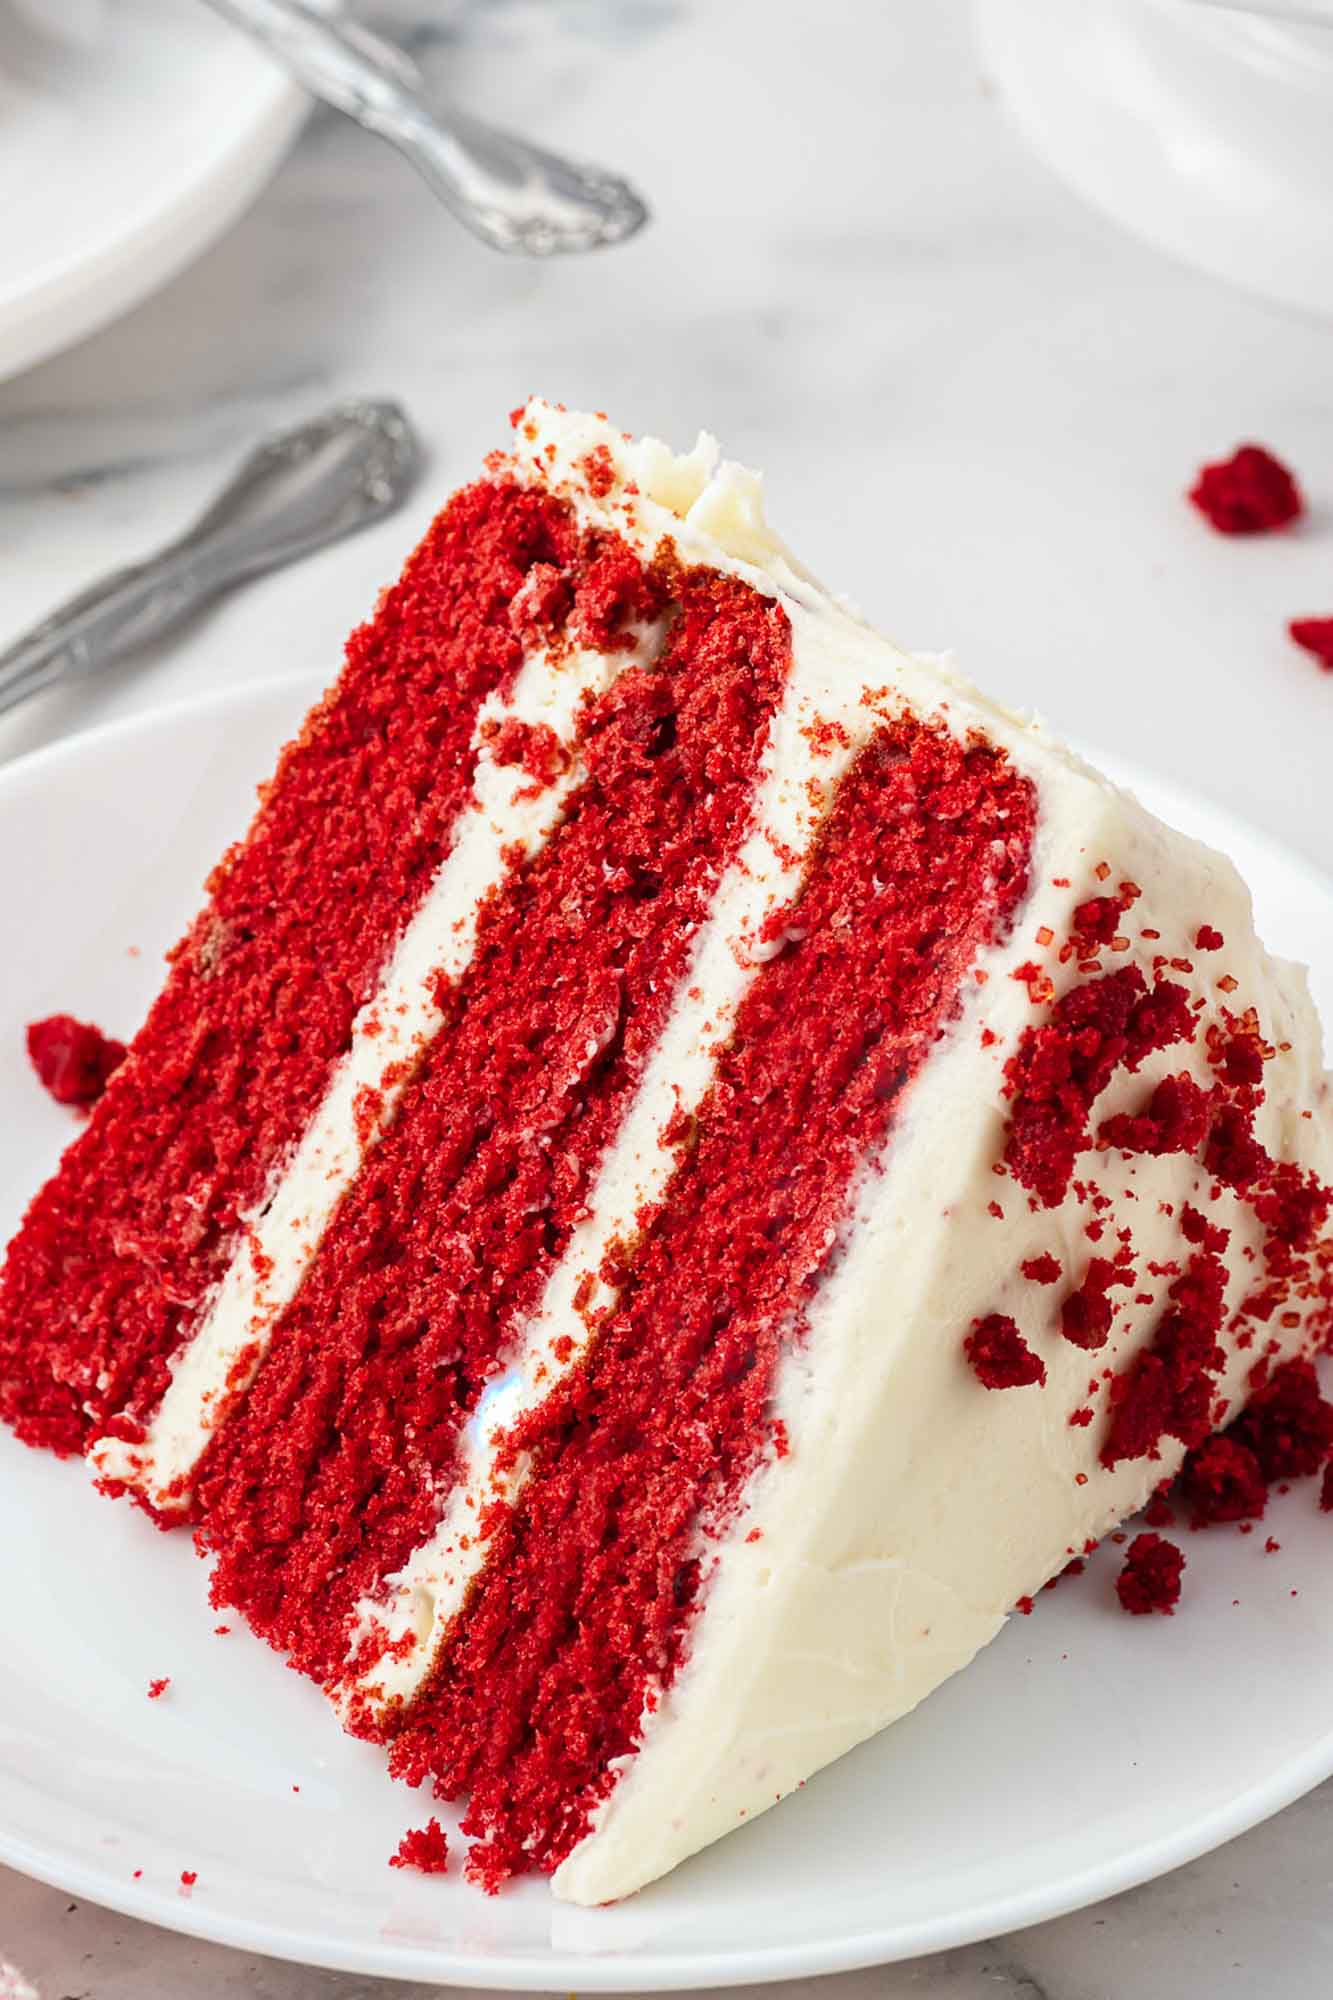 A slice of 3 layer red velvet cake frosted with cream cheese frosting, served on a small white cake plate.